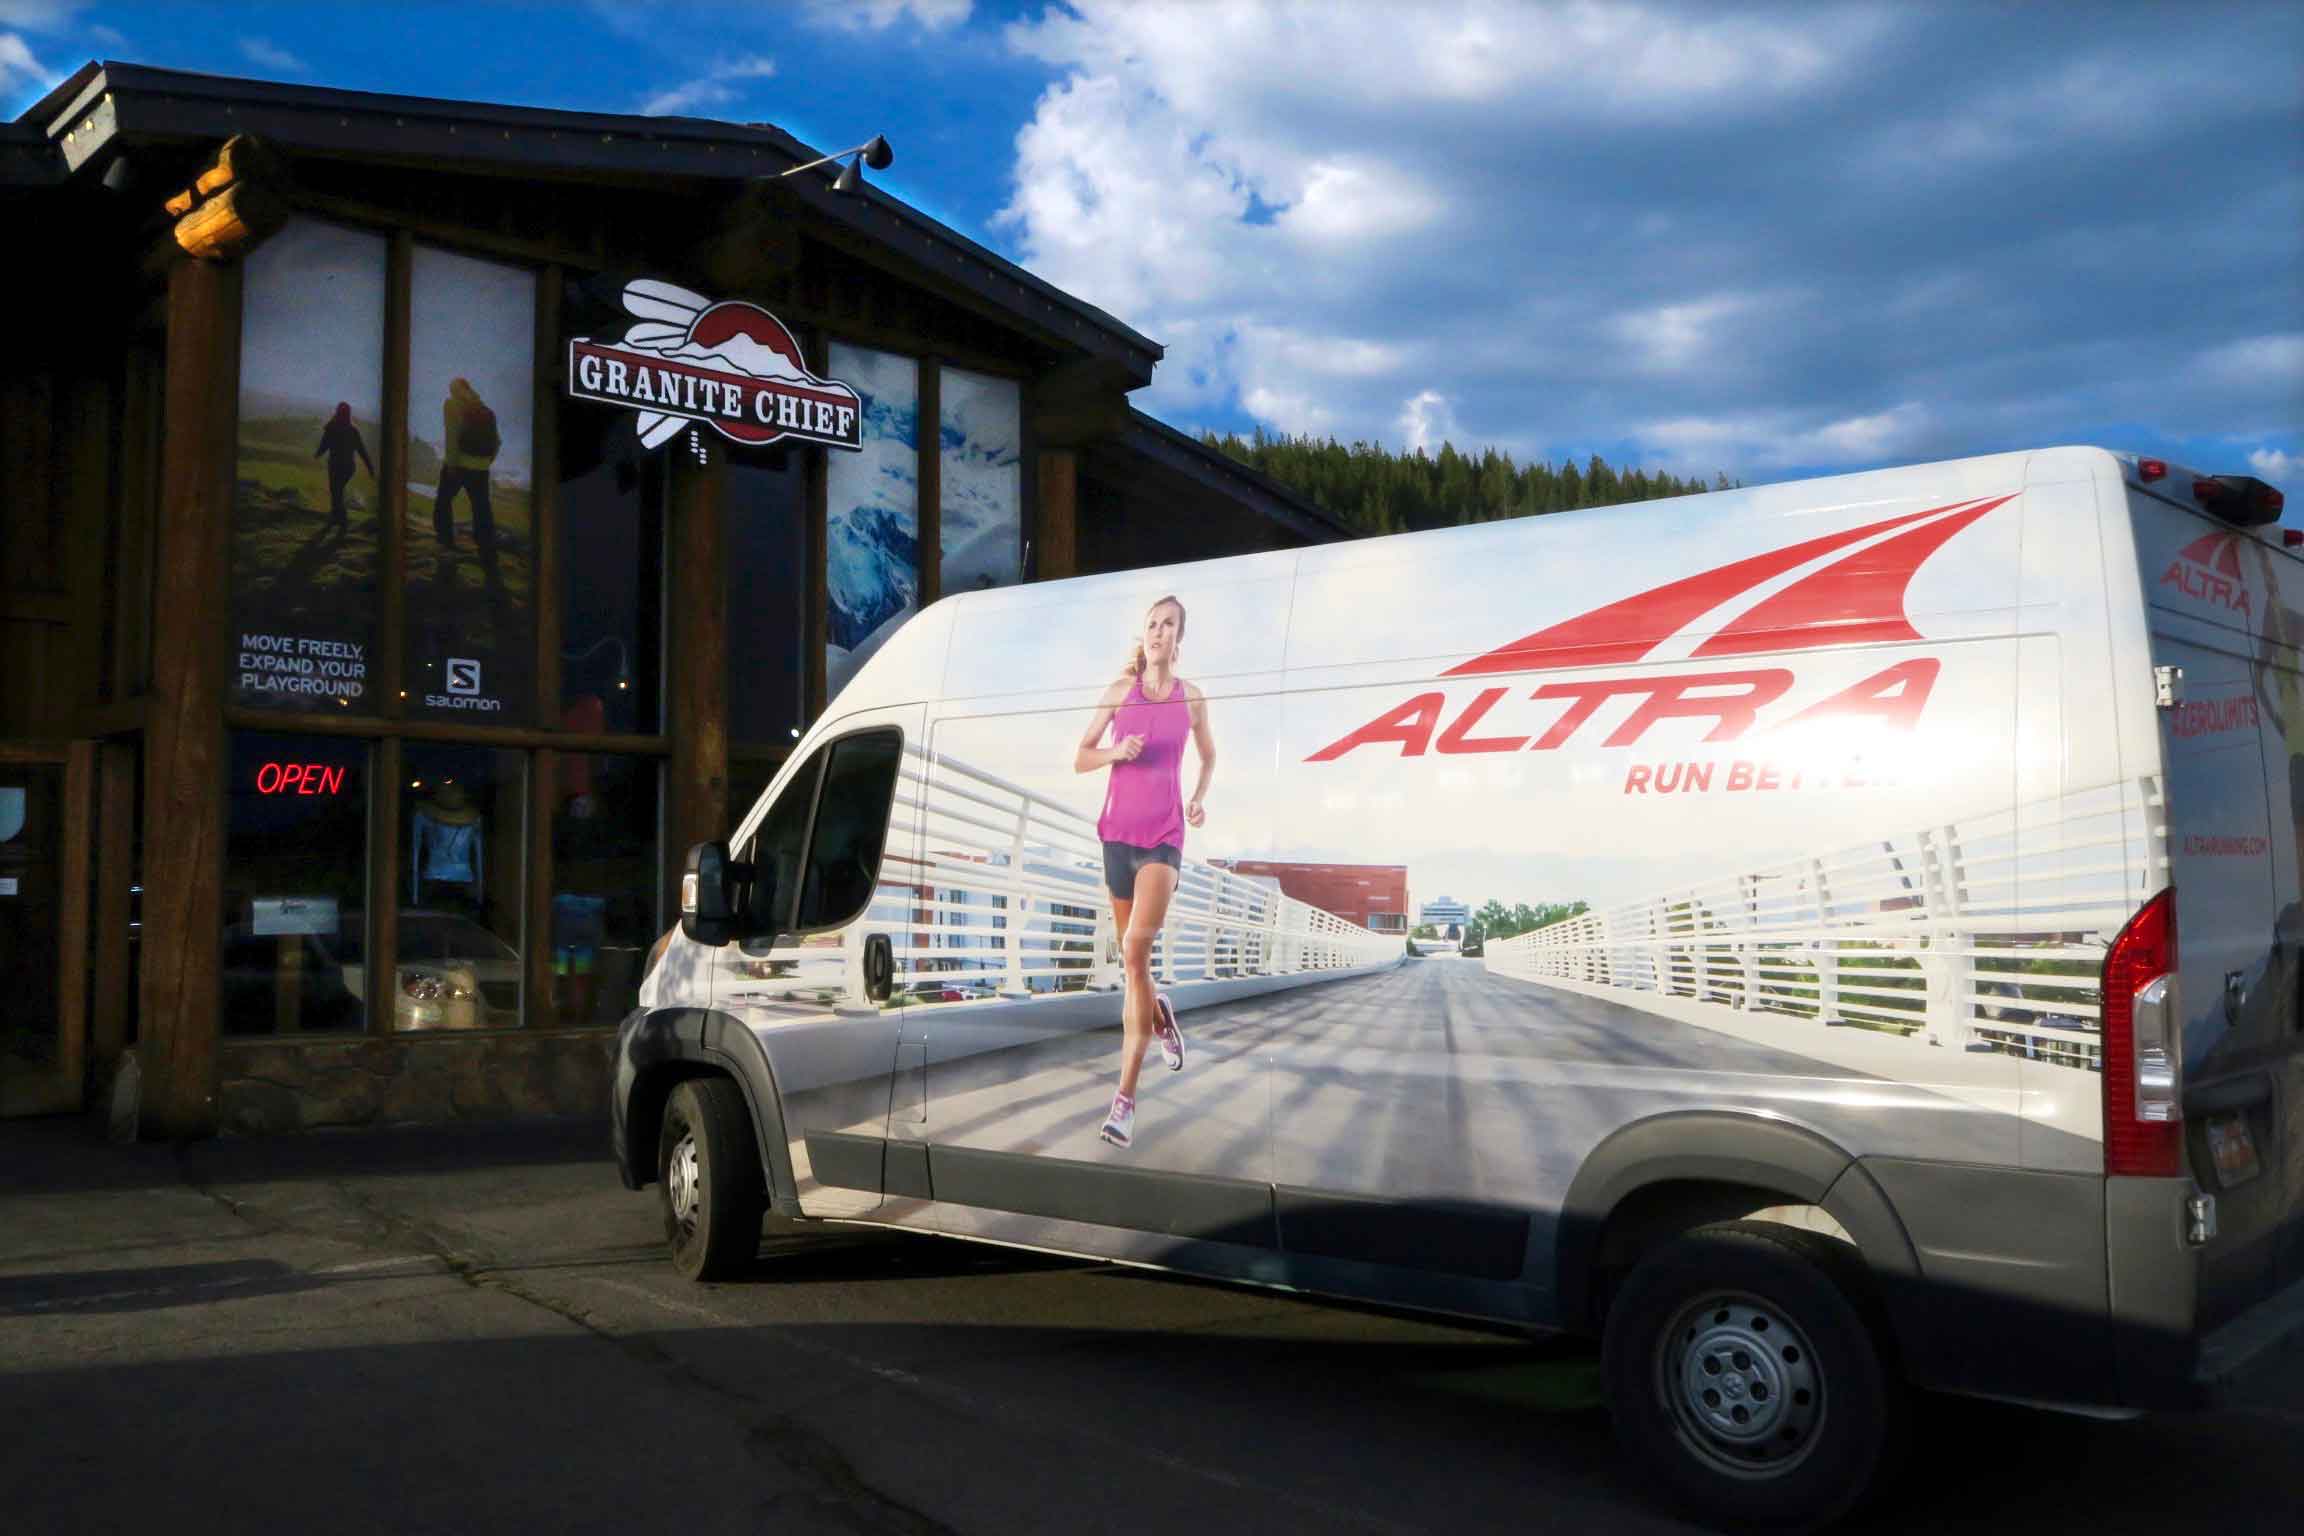 Zach Bitter & Altra Running Crew Visit Granite Chief and Share Insight | Many Thanks